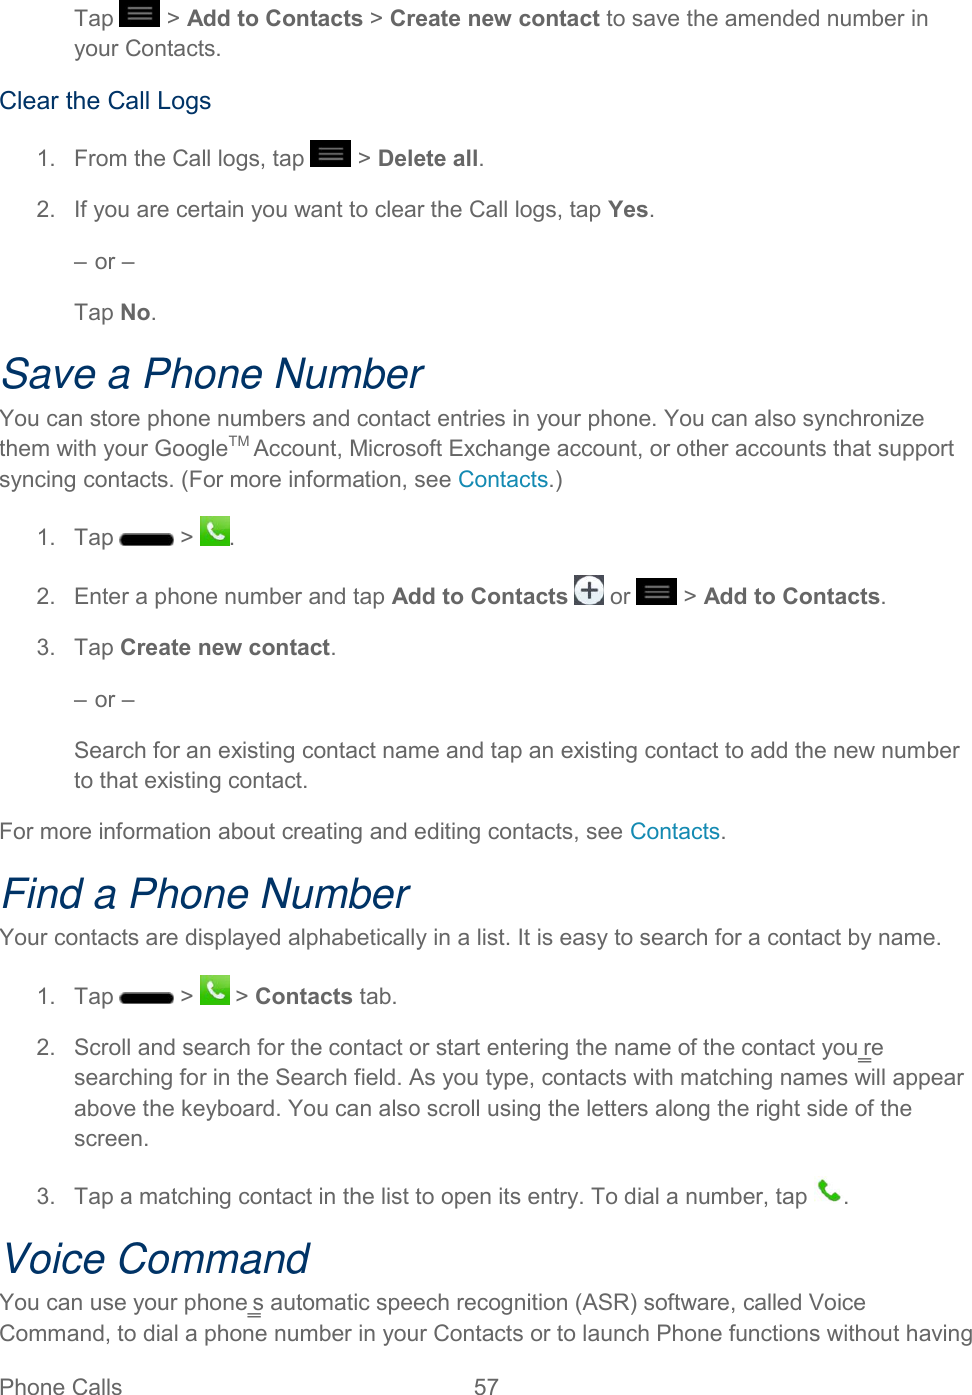  Phone Calls  57   Tap   &gt; Add to Contacts &gt; Create new contact to save the amended number in your Contacts.  Clear the Call Logs  1.  From the Call logs, tap   &gt; Delete all.  2.  If you are certain you want to clear the Call logs, tap Yes.  – or –  Tap No.  Save a Phone Number  You can store phone numbers and contact entries in your phone. You can also synchronize them with your GoogleTM Account, Microsoft Exchange account, or other accounts that support syncing contacts. (For more information, see Contacts.)  1.  Tap   &gt;  .  2.  Enter a phone number and tap Add to Contacts   or   &gt; Add to Contacts.  3.  Tap Create new contact.  – or –  Search for an existing contact name and tap an existing contact to add the new number to that existing contact.  For more information about creating and editing contacts, see Contacts. Find a Phone Number Your contacts are displayed alphabetically in a list. It is easy to search for a contact by name. 1.  Tap   &gt;   &gt; Contacts tab. 2.  Scroll and search for the contact or start entering the name of the contact you‗re searching for in the Search field. As you type, contacts with matching names will appear above the keyboard. You can also scroll using the letters along the right side of the screen. 3.  Tap a matching contact in the list to open its entry. To dial a number, tap  . Voice Command You can use your phone‗s automatic speech recognition (ASR) software, called Voice Command, to dial a phone number in your Contacts or to launch Phone functions without having 